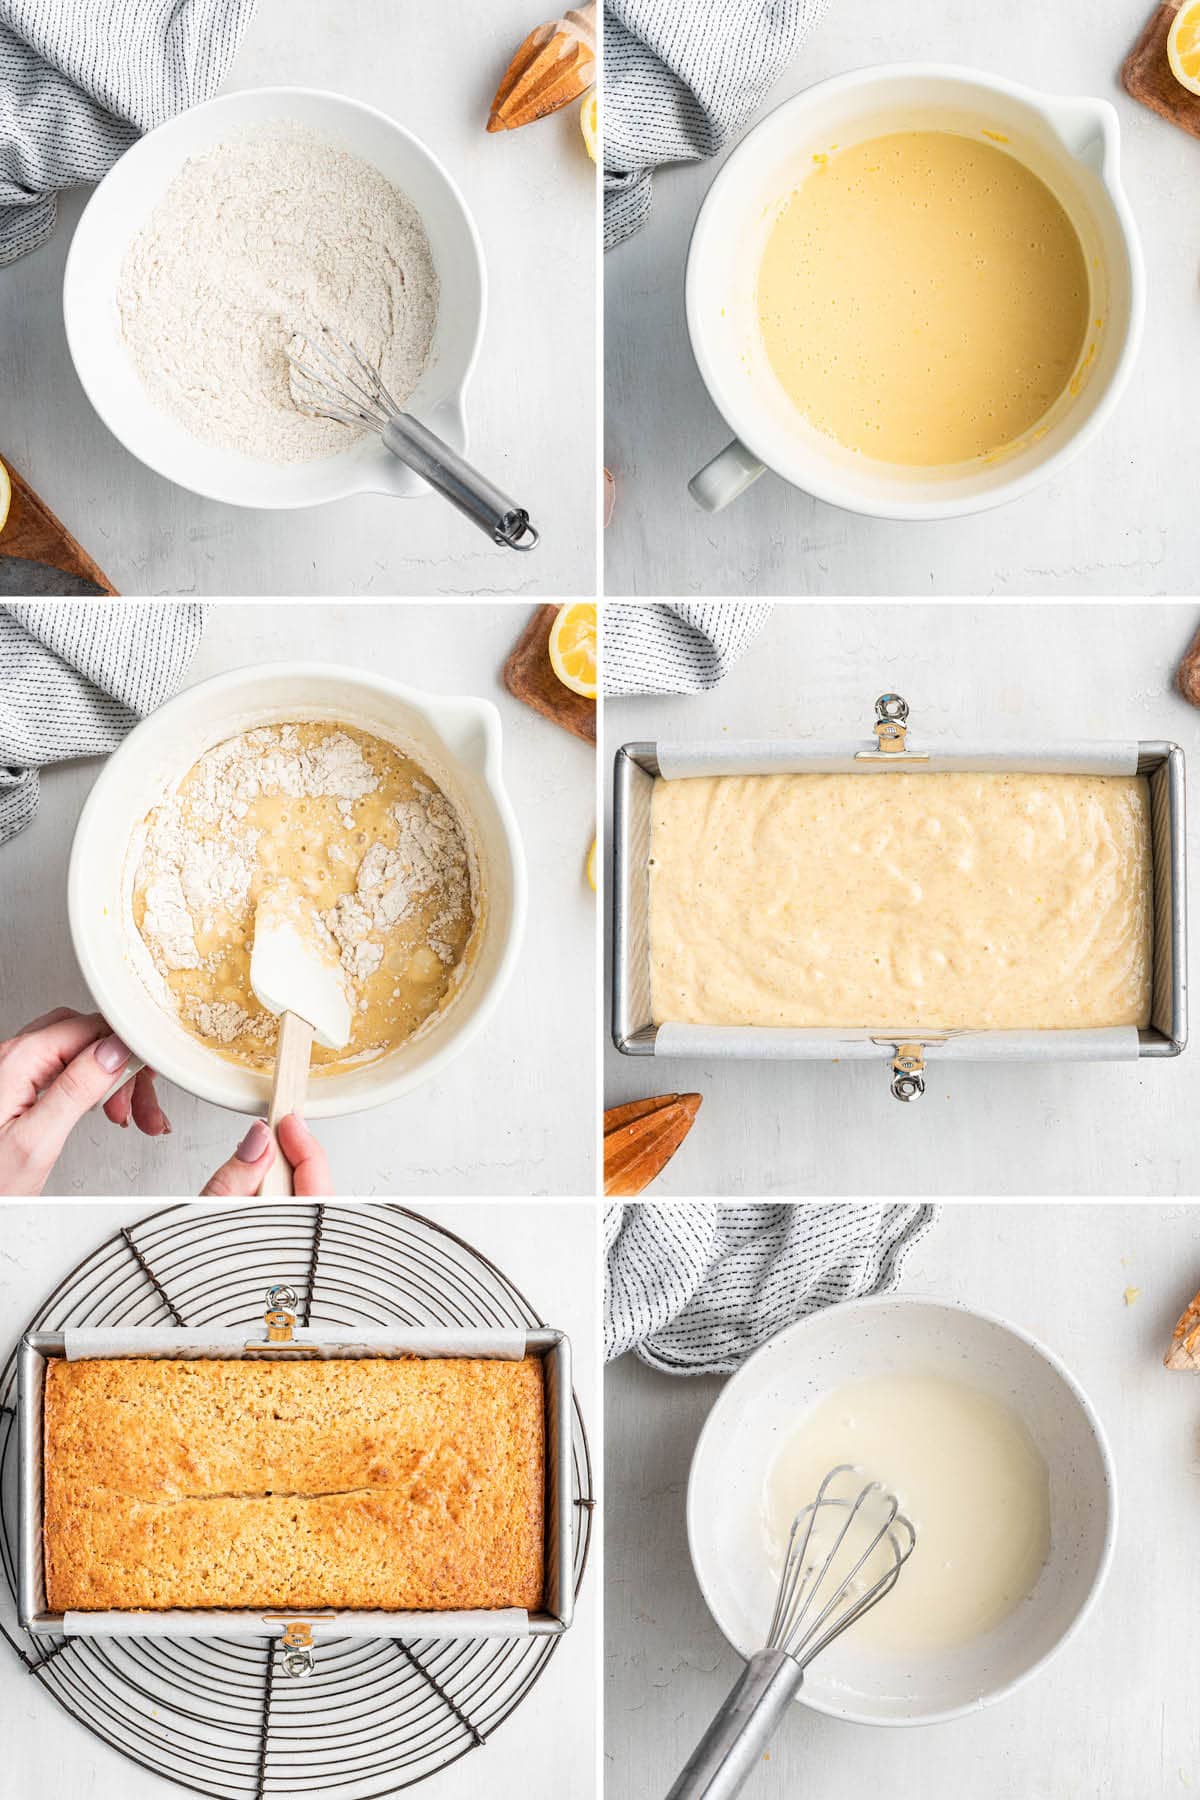 Collage of six photos showing the steps to making a healthy lemon loaf: mixing the batter, baking the loaf in a bread pan and then making a lemon glaze.